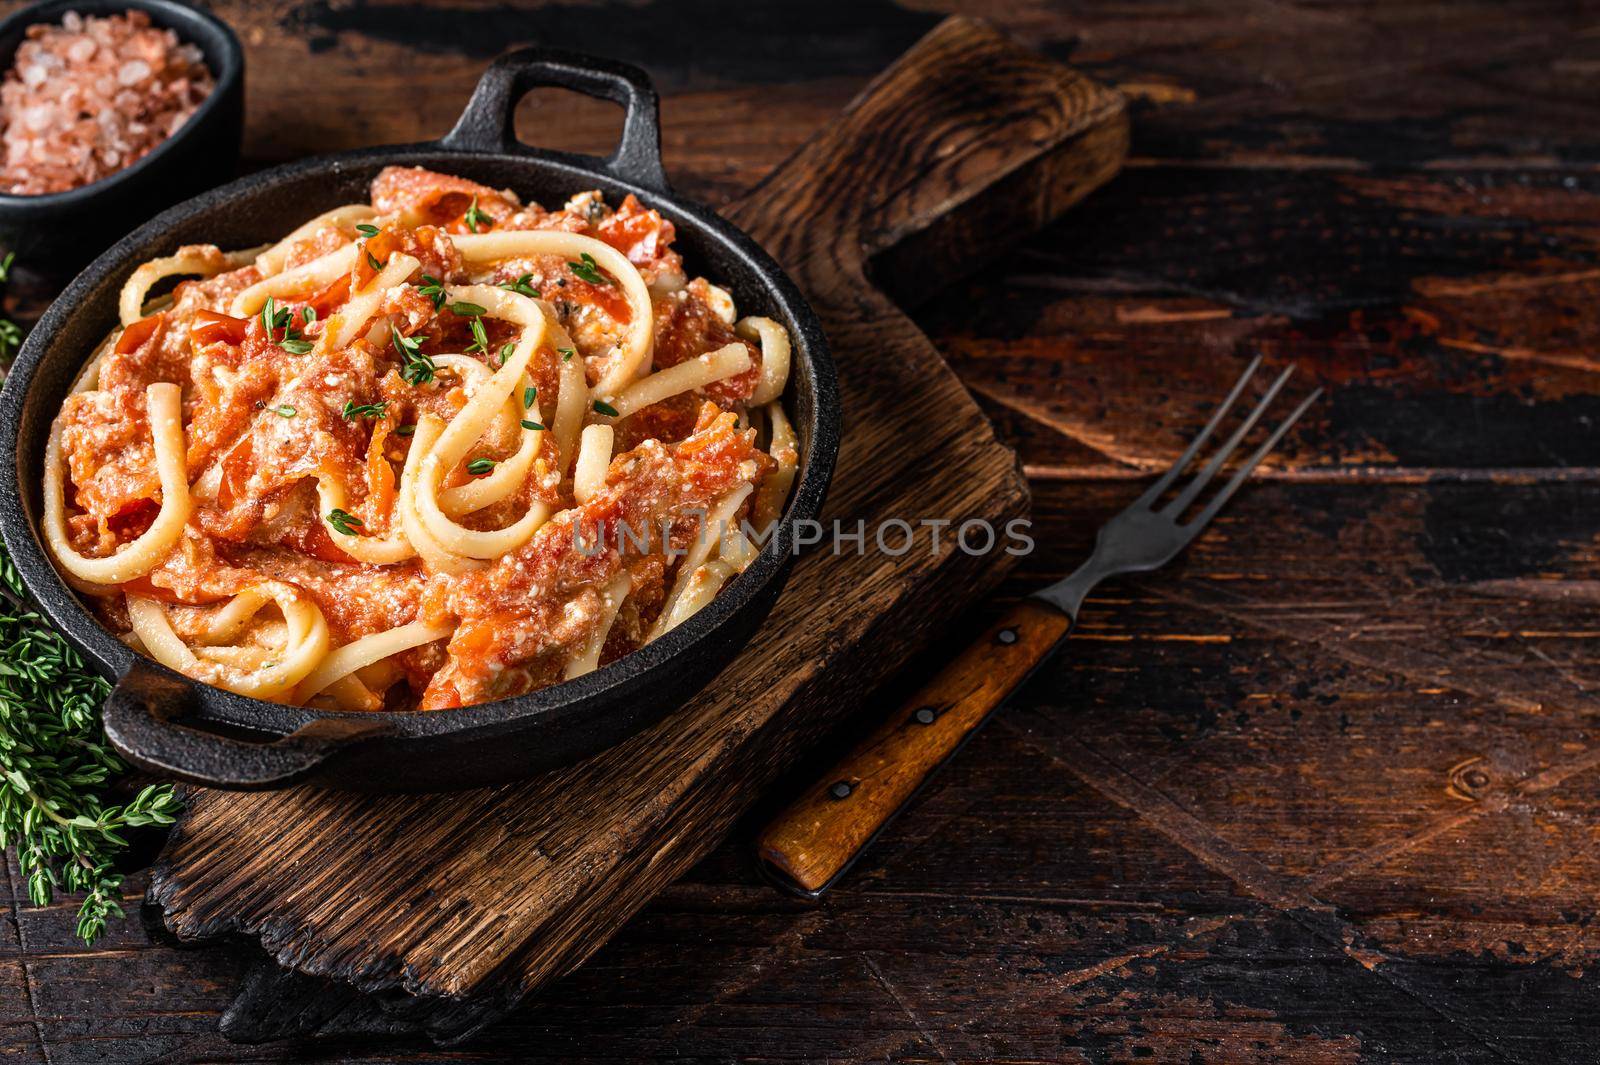 Trendy baked Feta pasta with Oven roasted tomatoes and cheese in a pan. Dark wooden background. Top view. Copy space by Composter